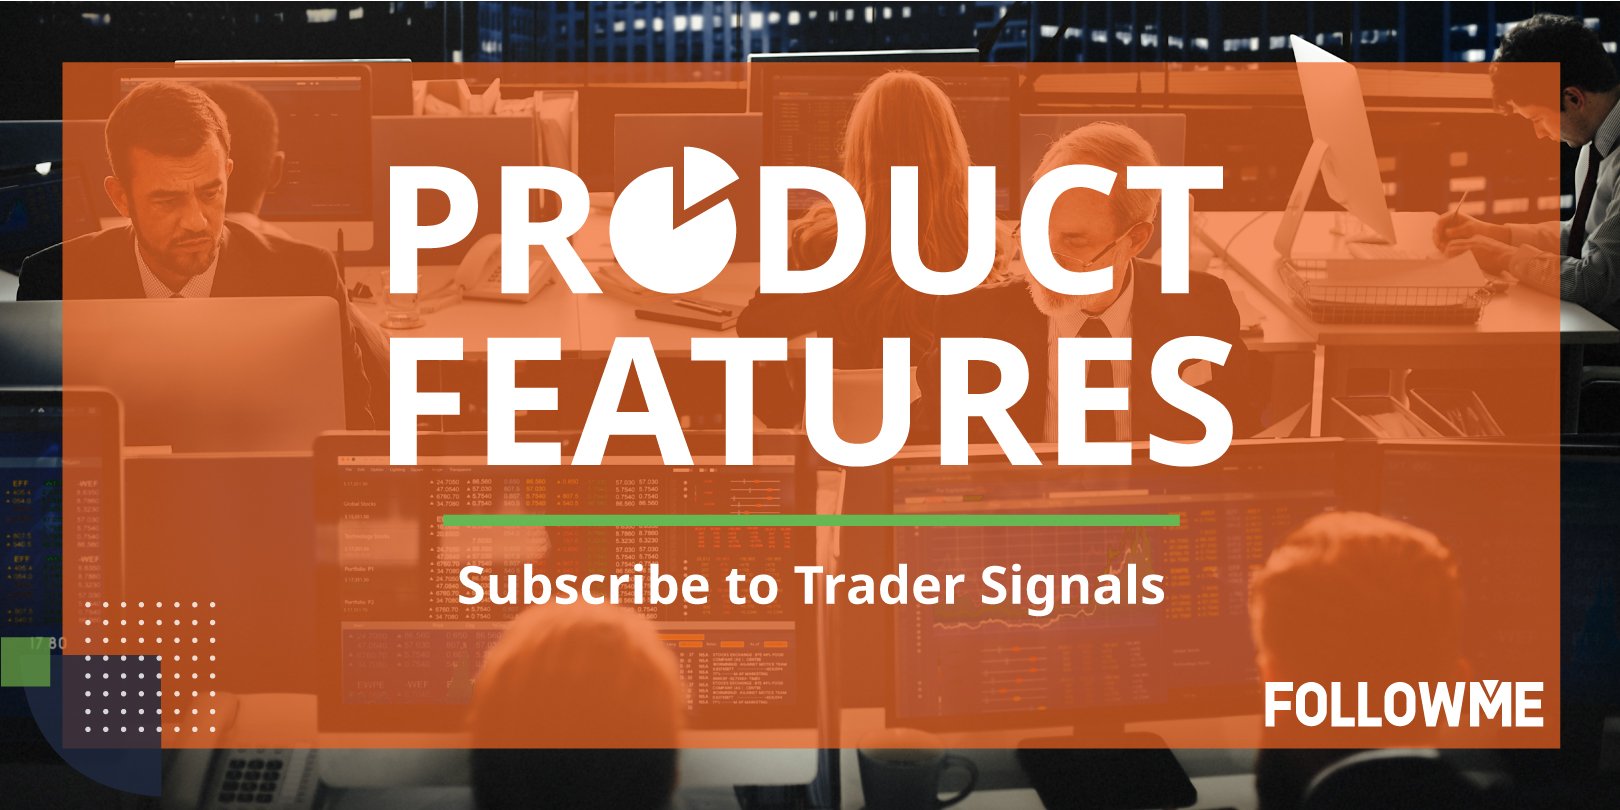 UPDATE: Subscribe to Trader Signals